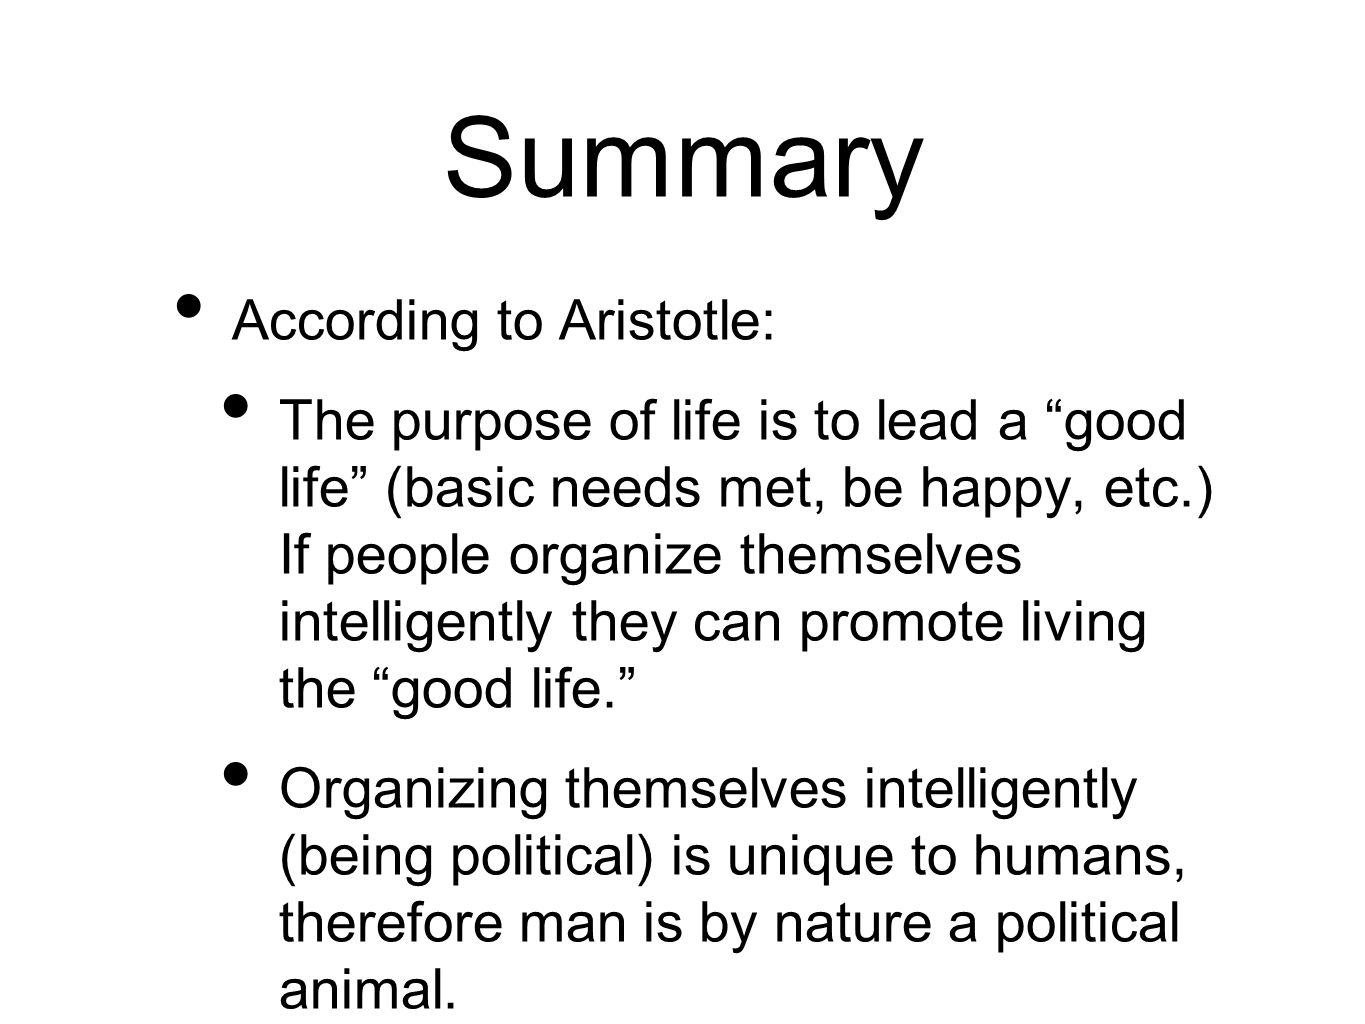 Man is by Nature a Political Animal - ppt video online download